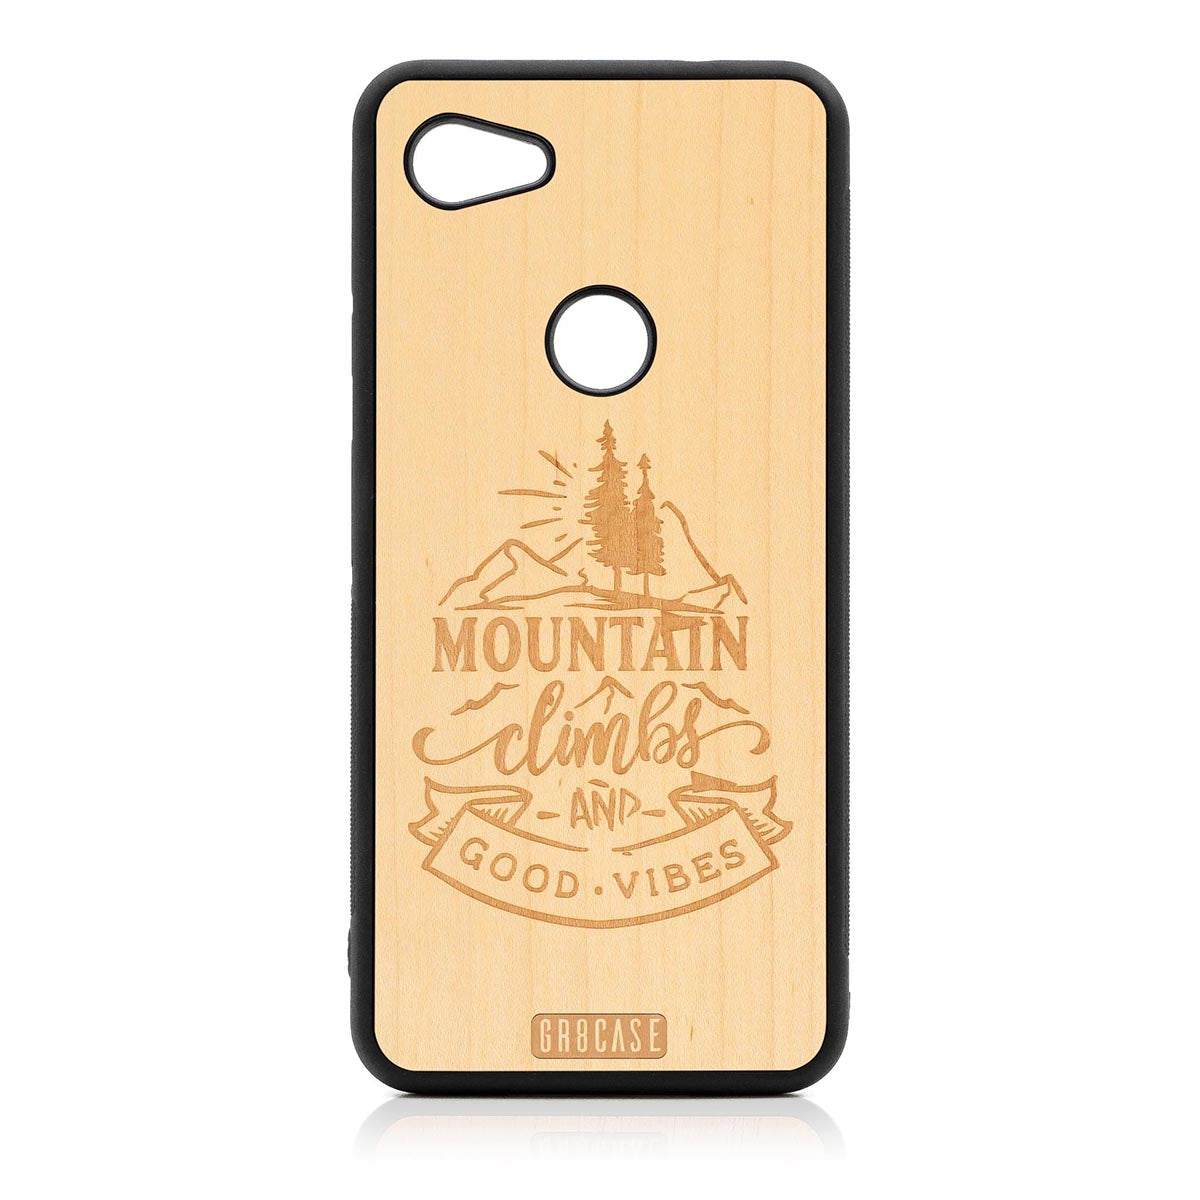 Mountain Climbs And Good Vibes Design Wood Case Google Pixel 3A by GR8CASE